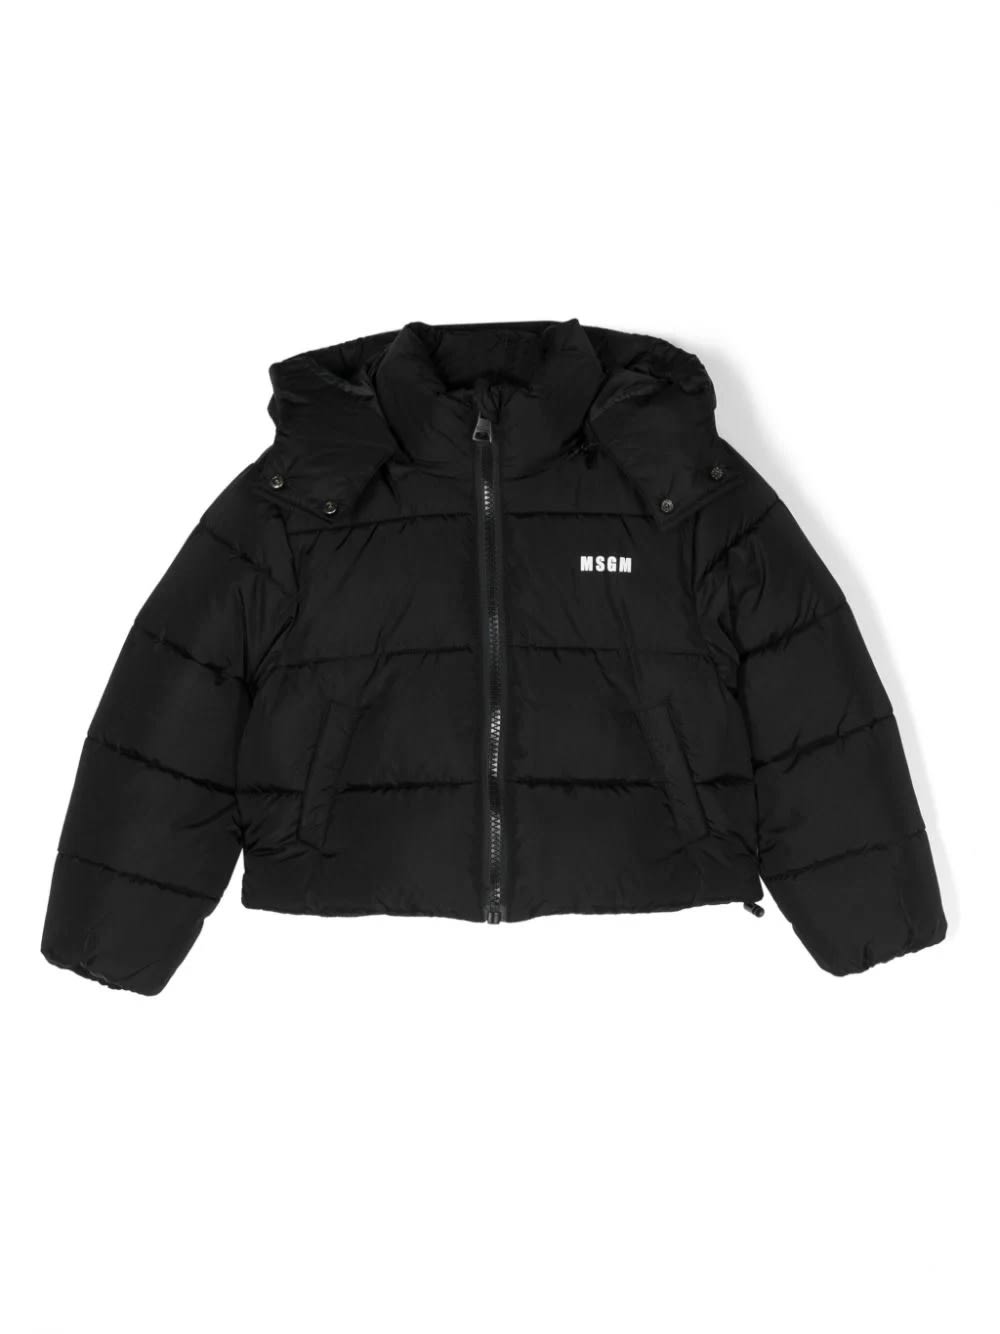 MSGM BLACK PUFFER JACKET WITH LOGO AND STAR